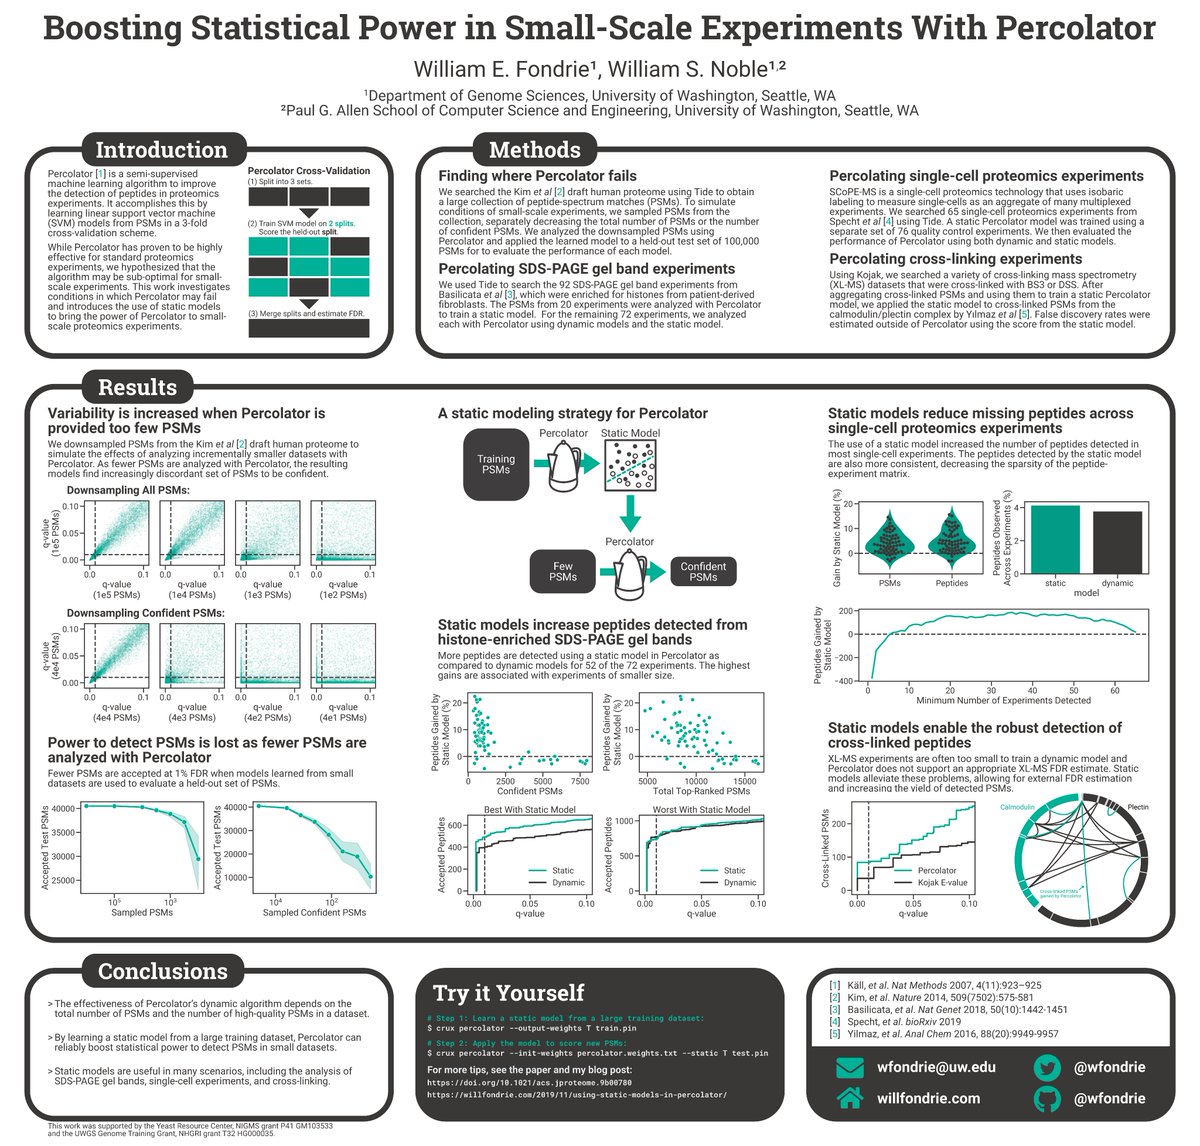 Since my poster was ready for #USHUPO, I figured why not share it here! Here it is: